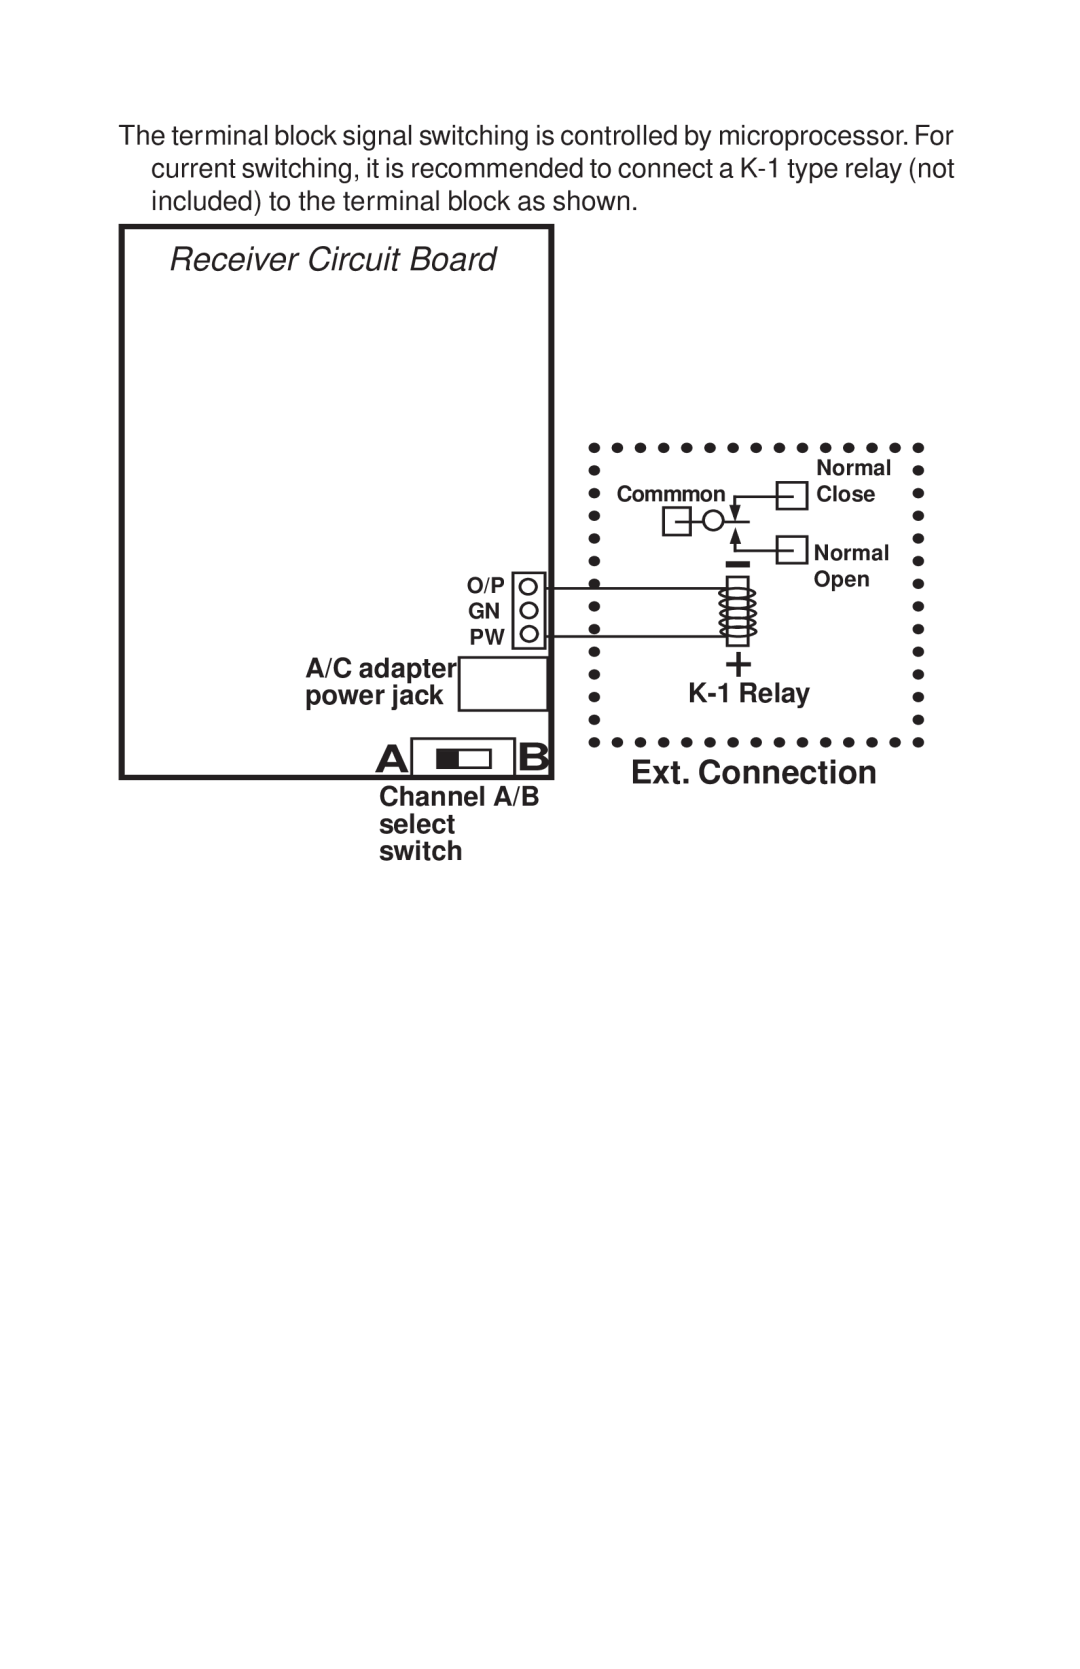 SmartPool Inc PE13 Ext. Connection, Receiver Circuit Board, A/C adapter power jack, Channel A/B select switch, K-1 Relay 